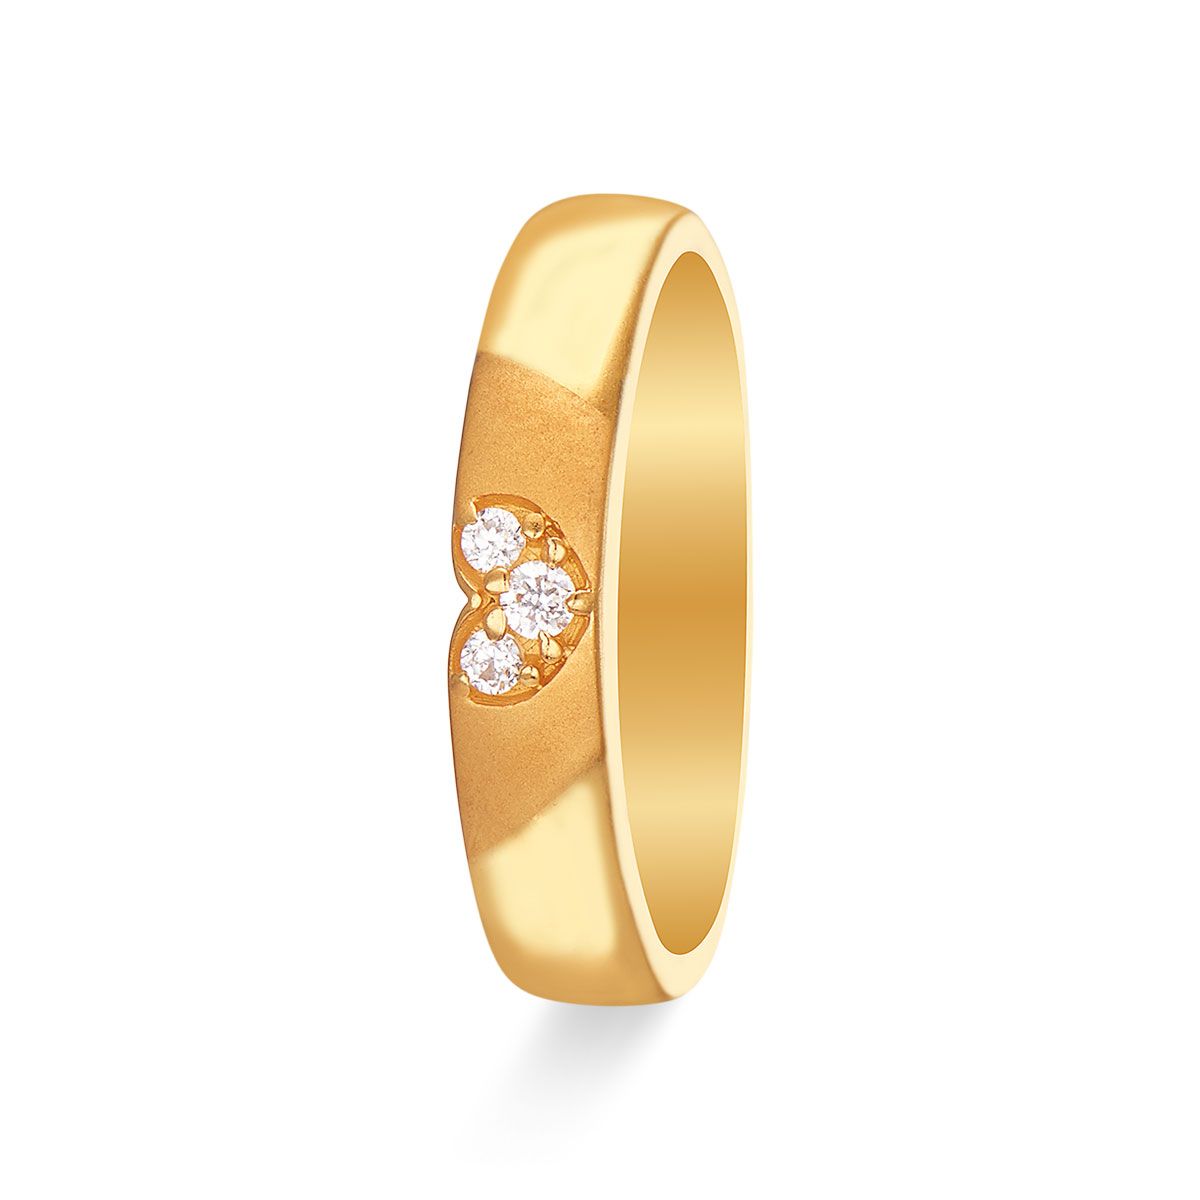 Buy Online Shiv Ring Gold Plated | jewellery for men | menjewell.com